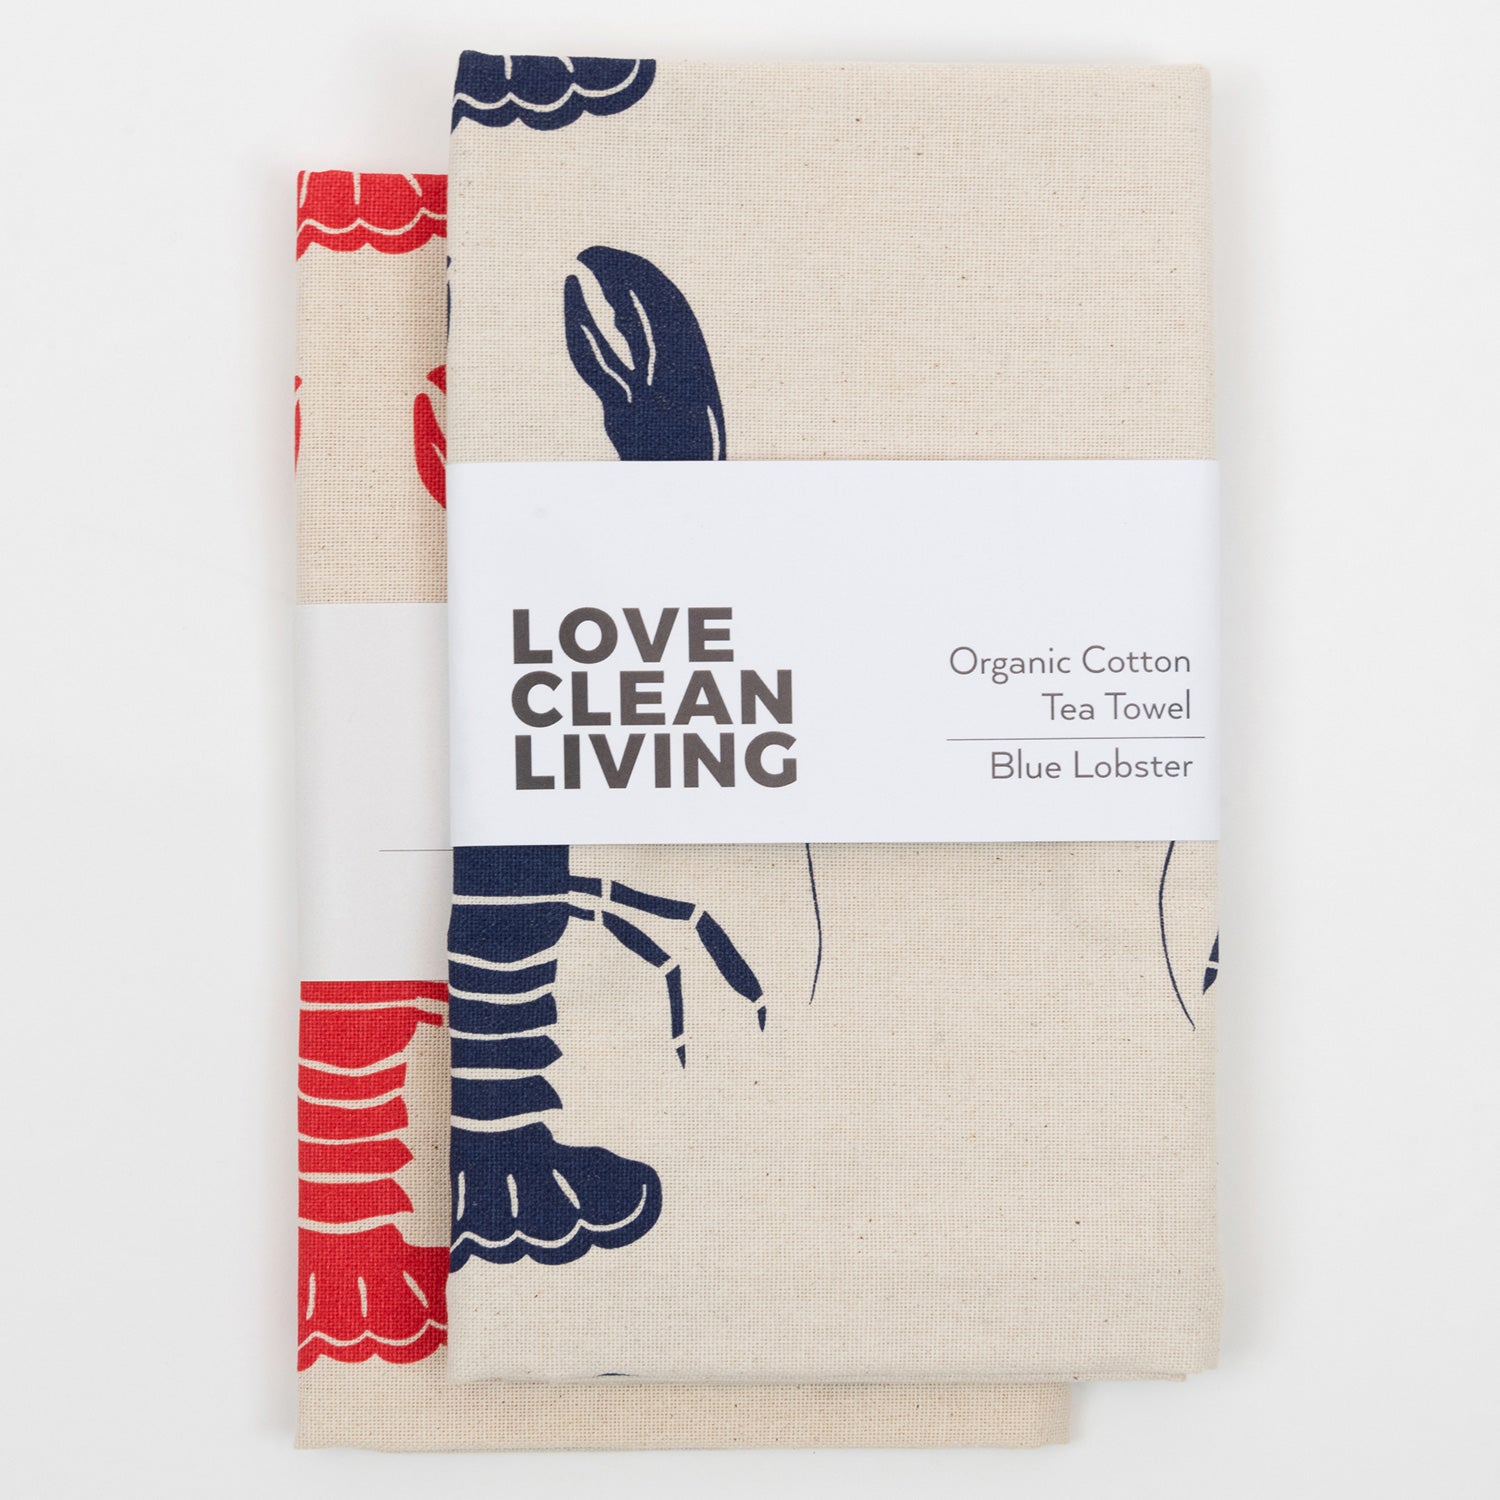 The Navy Lobster Tea Towel and the Red Lobster Tea Towel in a pile and in packaging.